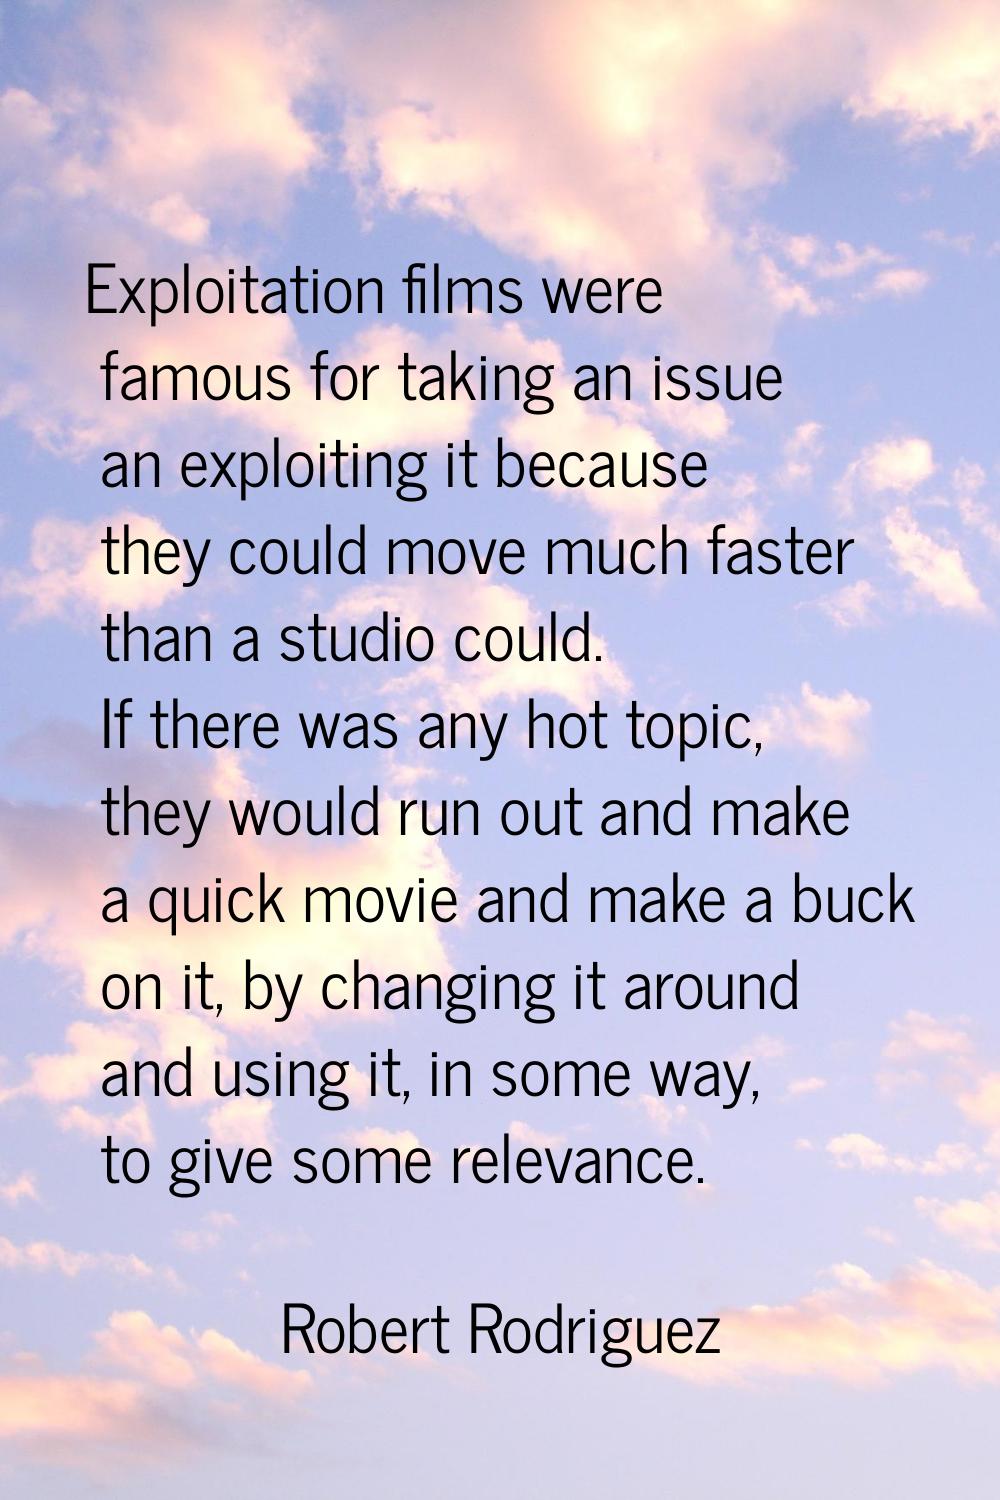 Exploitation films were famous for taking an issue an exploiting it because they could move much fa